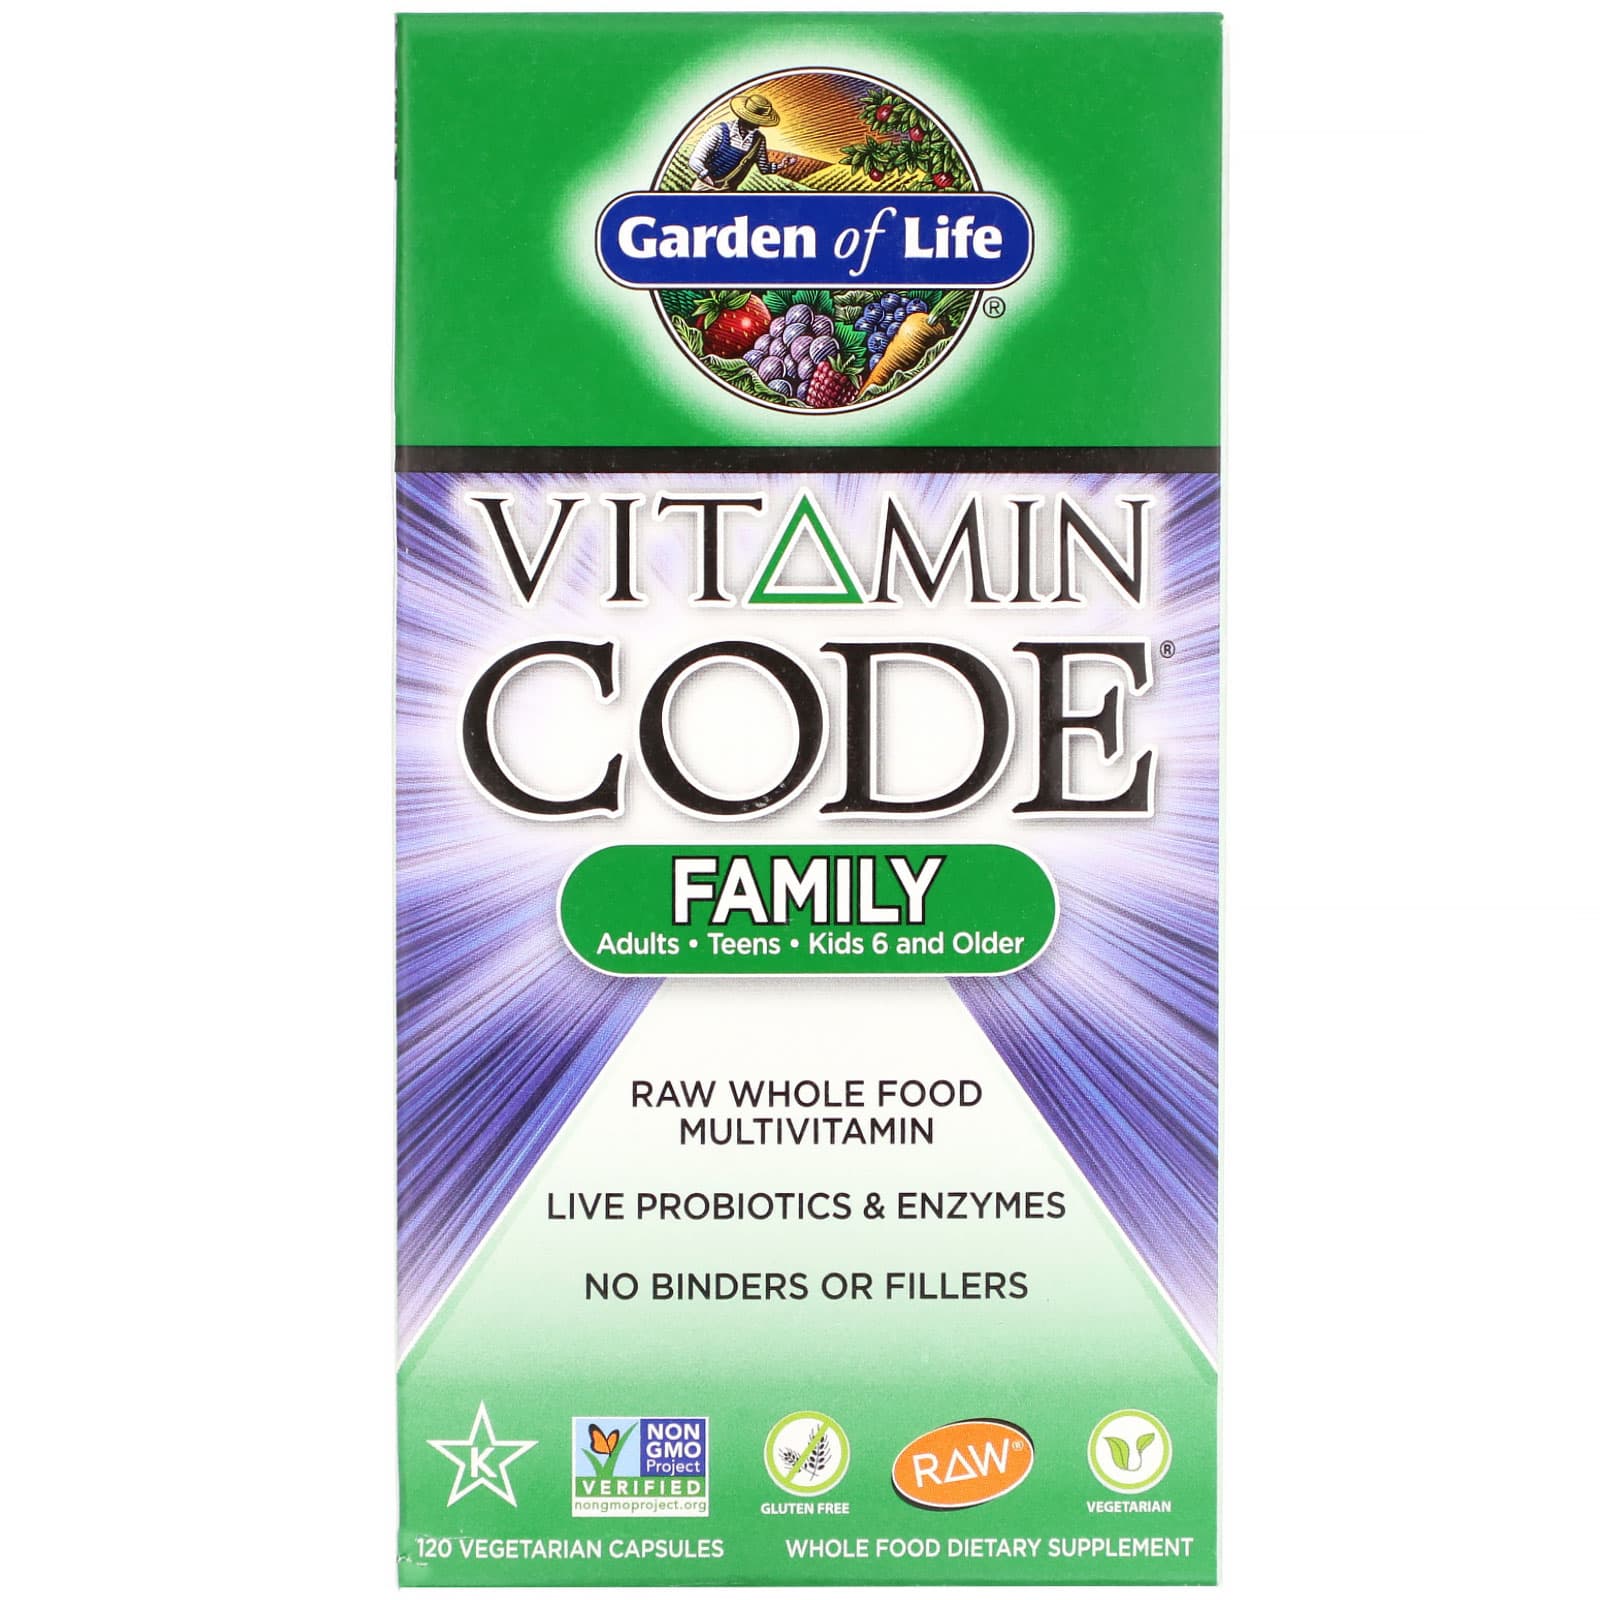 50 Questions Answered About promo code iherb august 2020